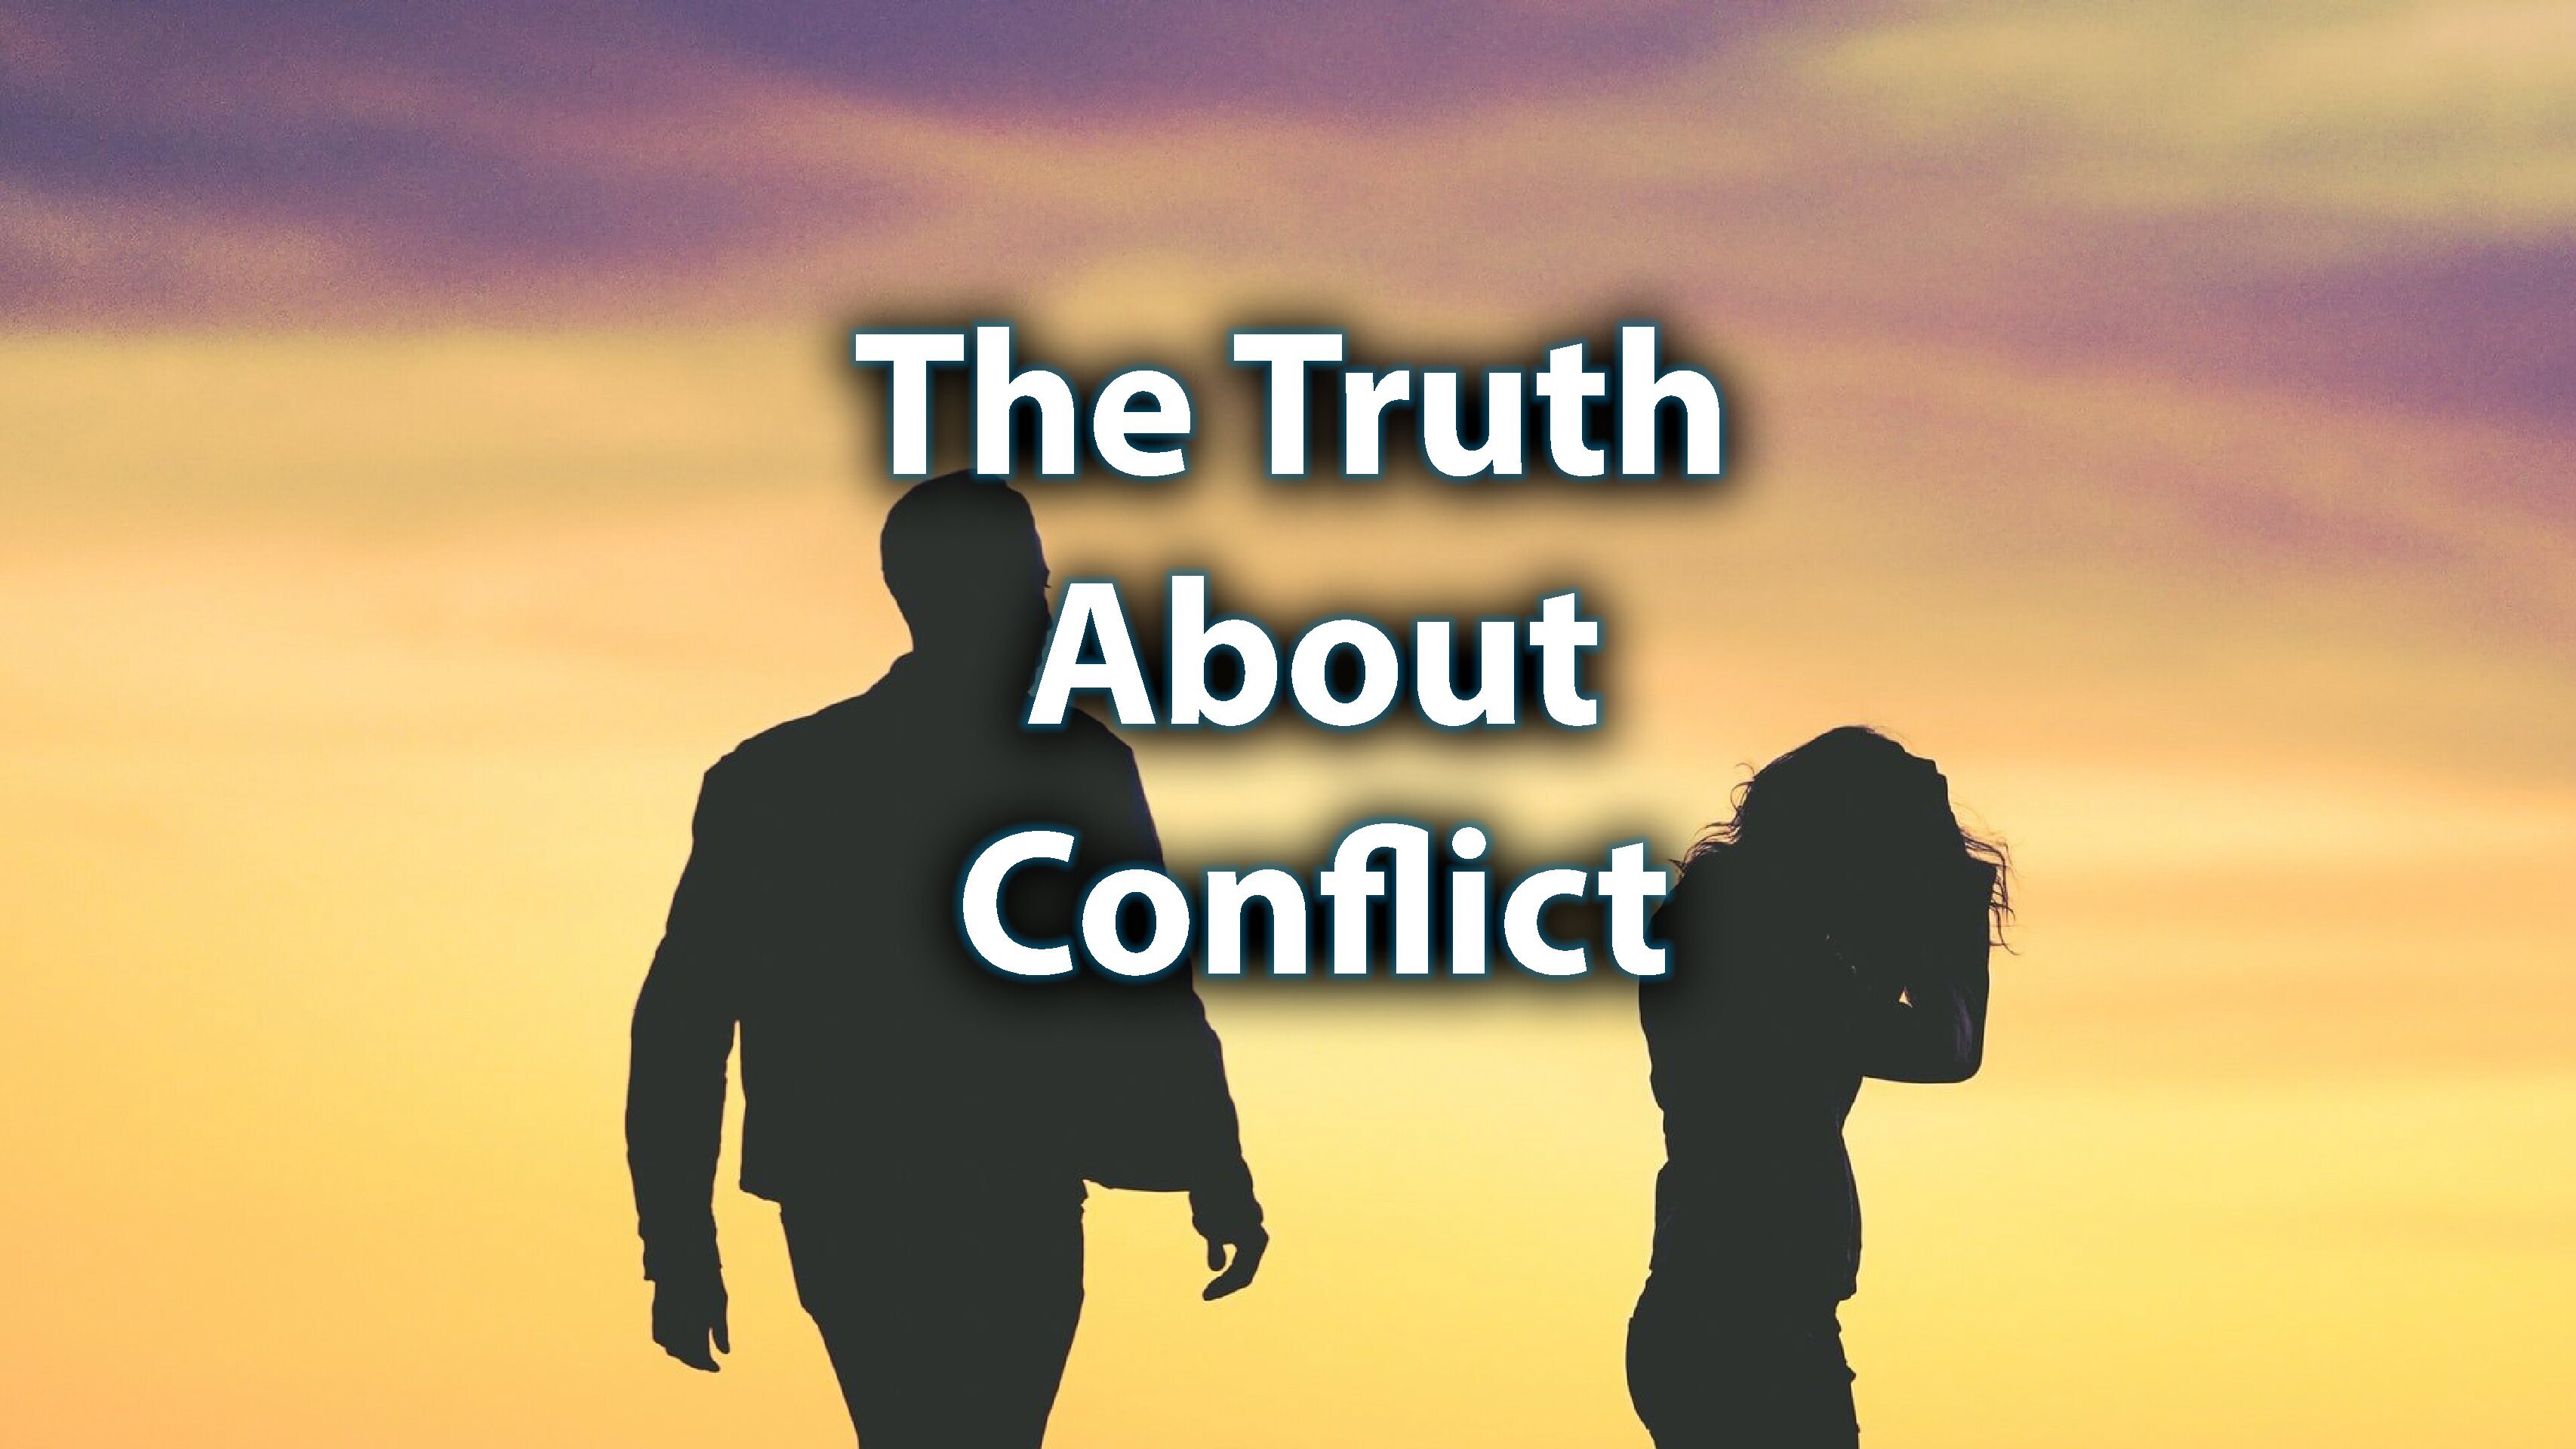 Day 16: The Truth About Conflict